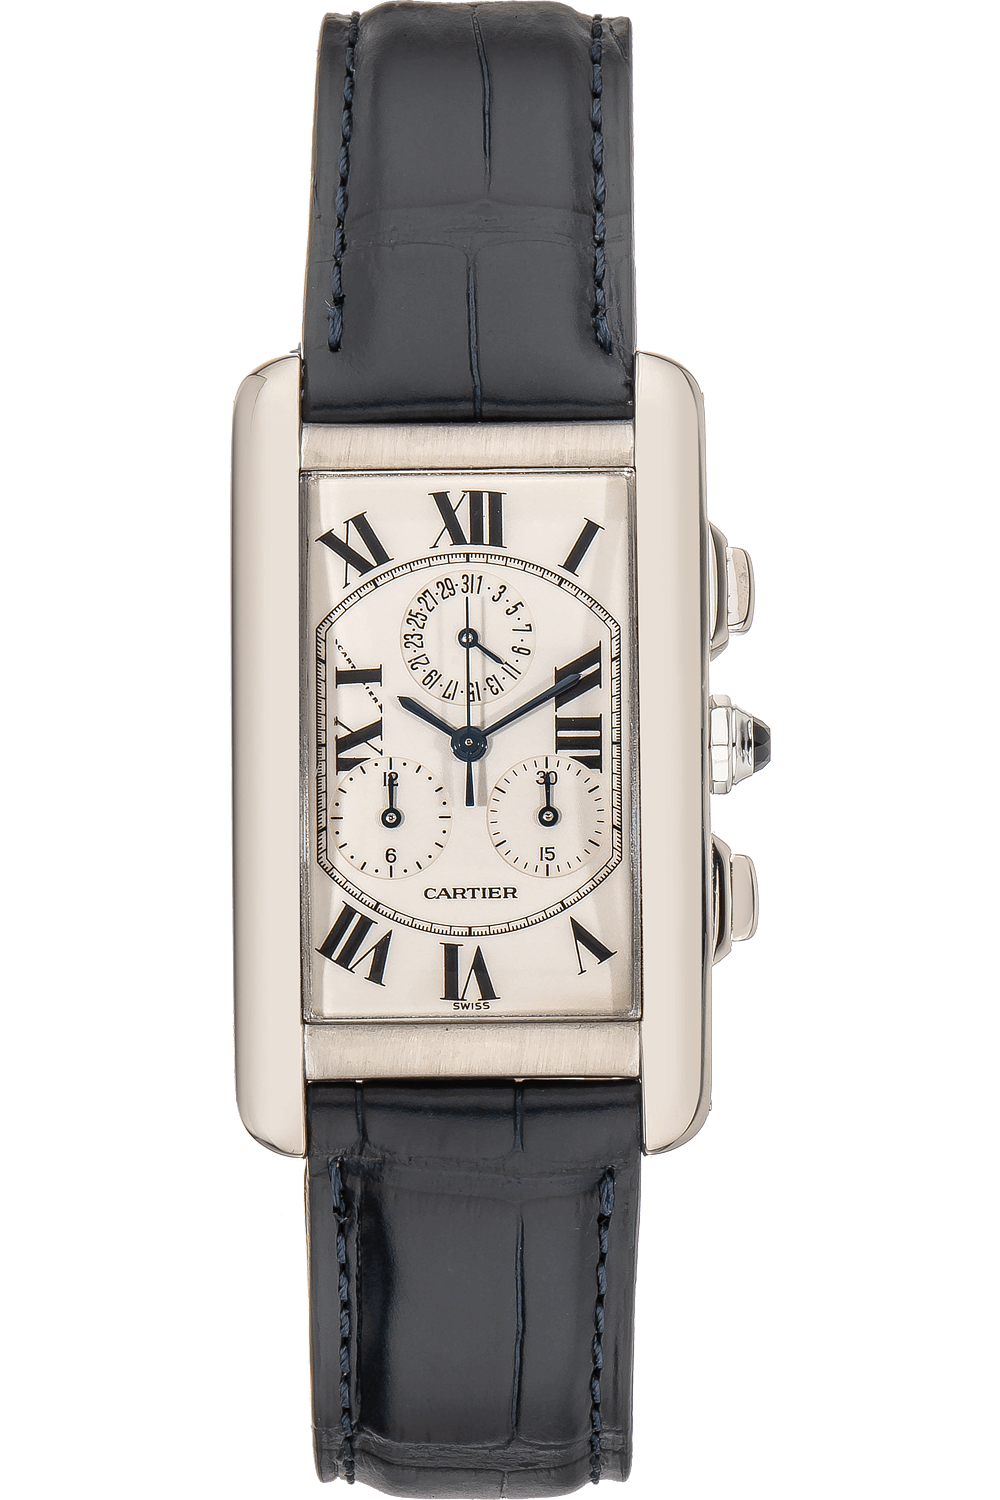 tourneau pre owned cartier watches